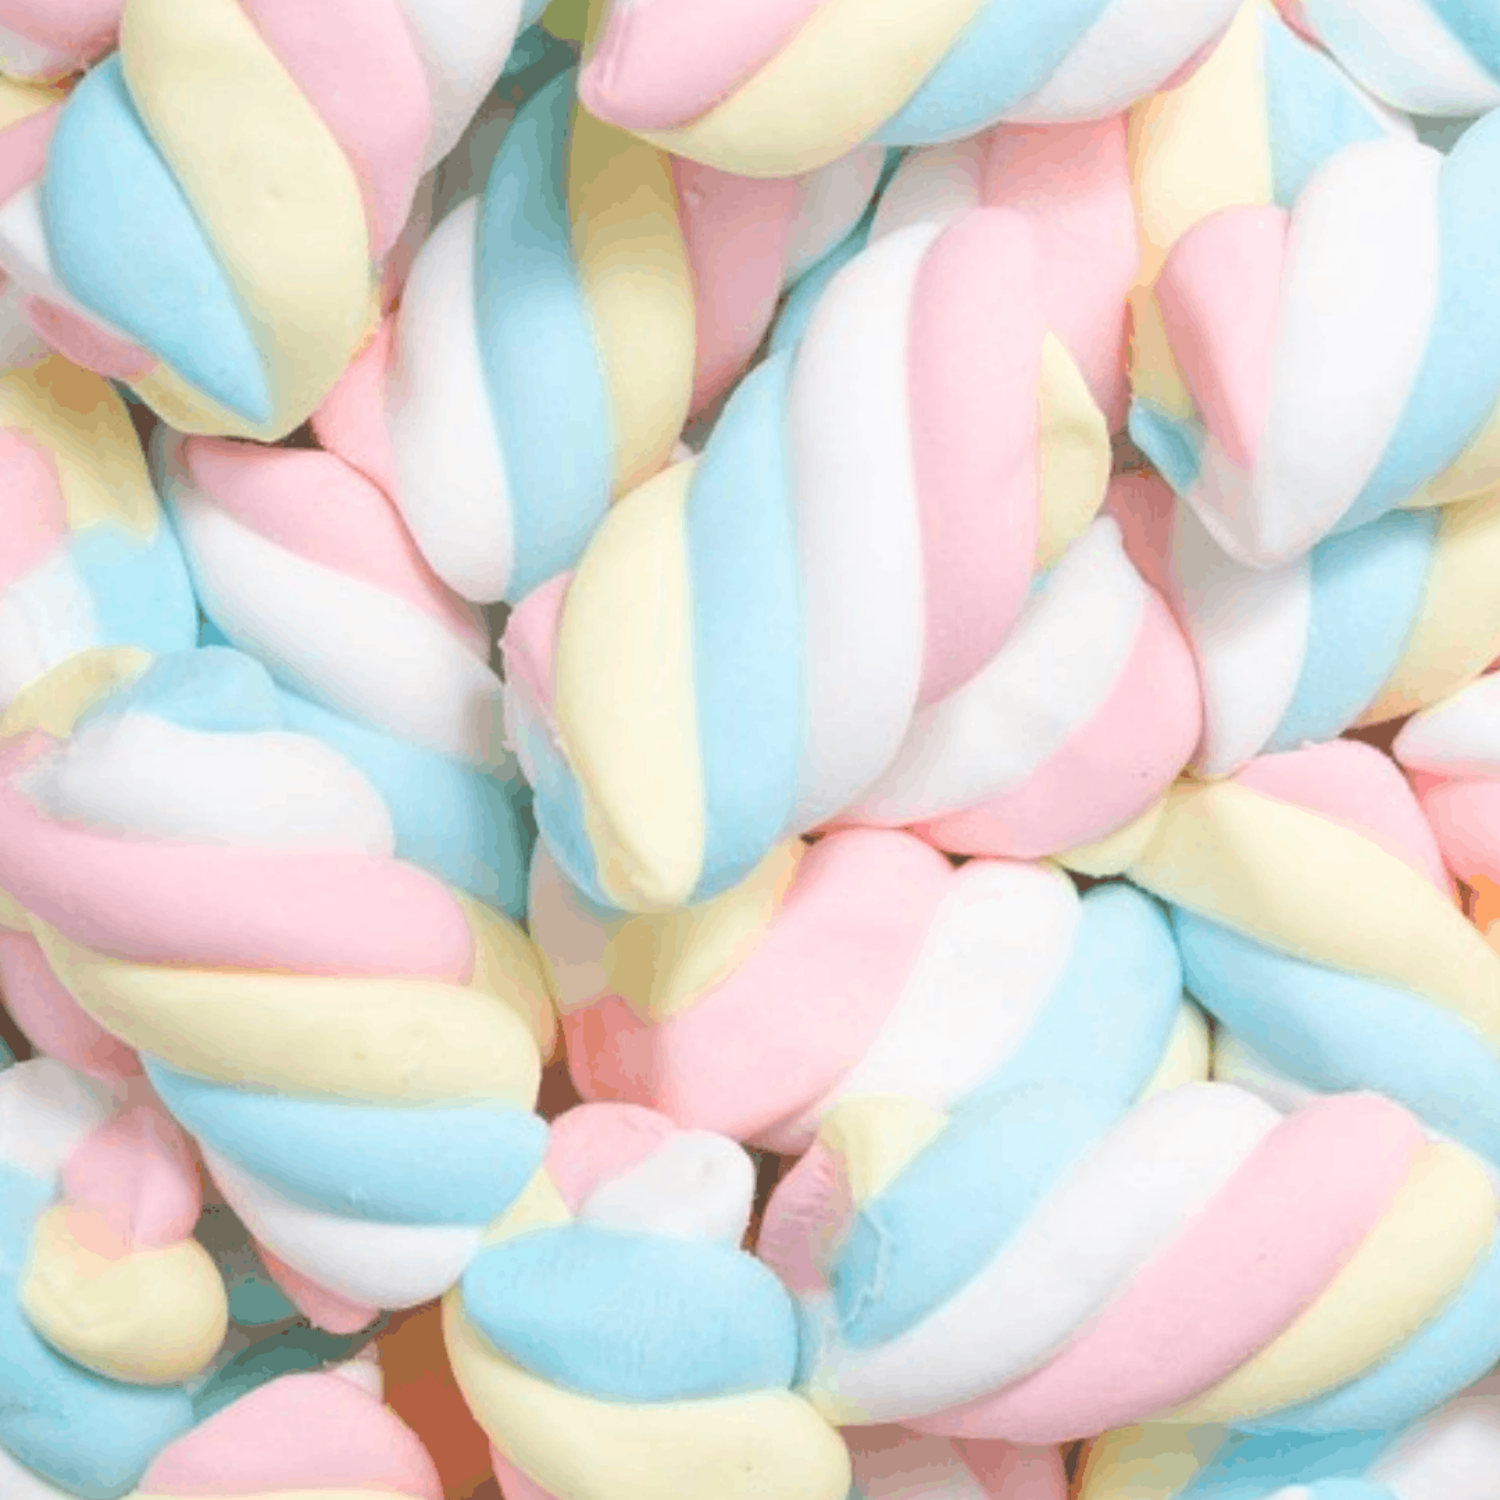 Marshmallow Twists Candy 3.53-oz. Bag with Swirled Rainbow Colors Great for Snacking Kid's Lunchbox Movie Nights Halloween Trick or Treats, Goody Fillers & Birthday Party Favor 2 Packs - image 5 of 6